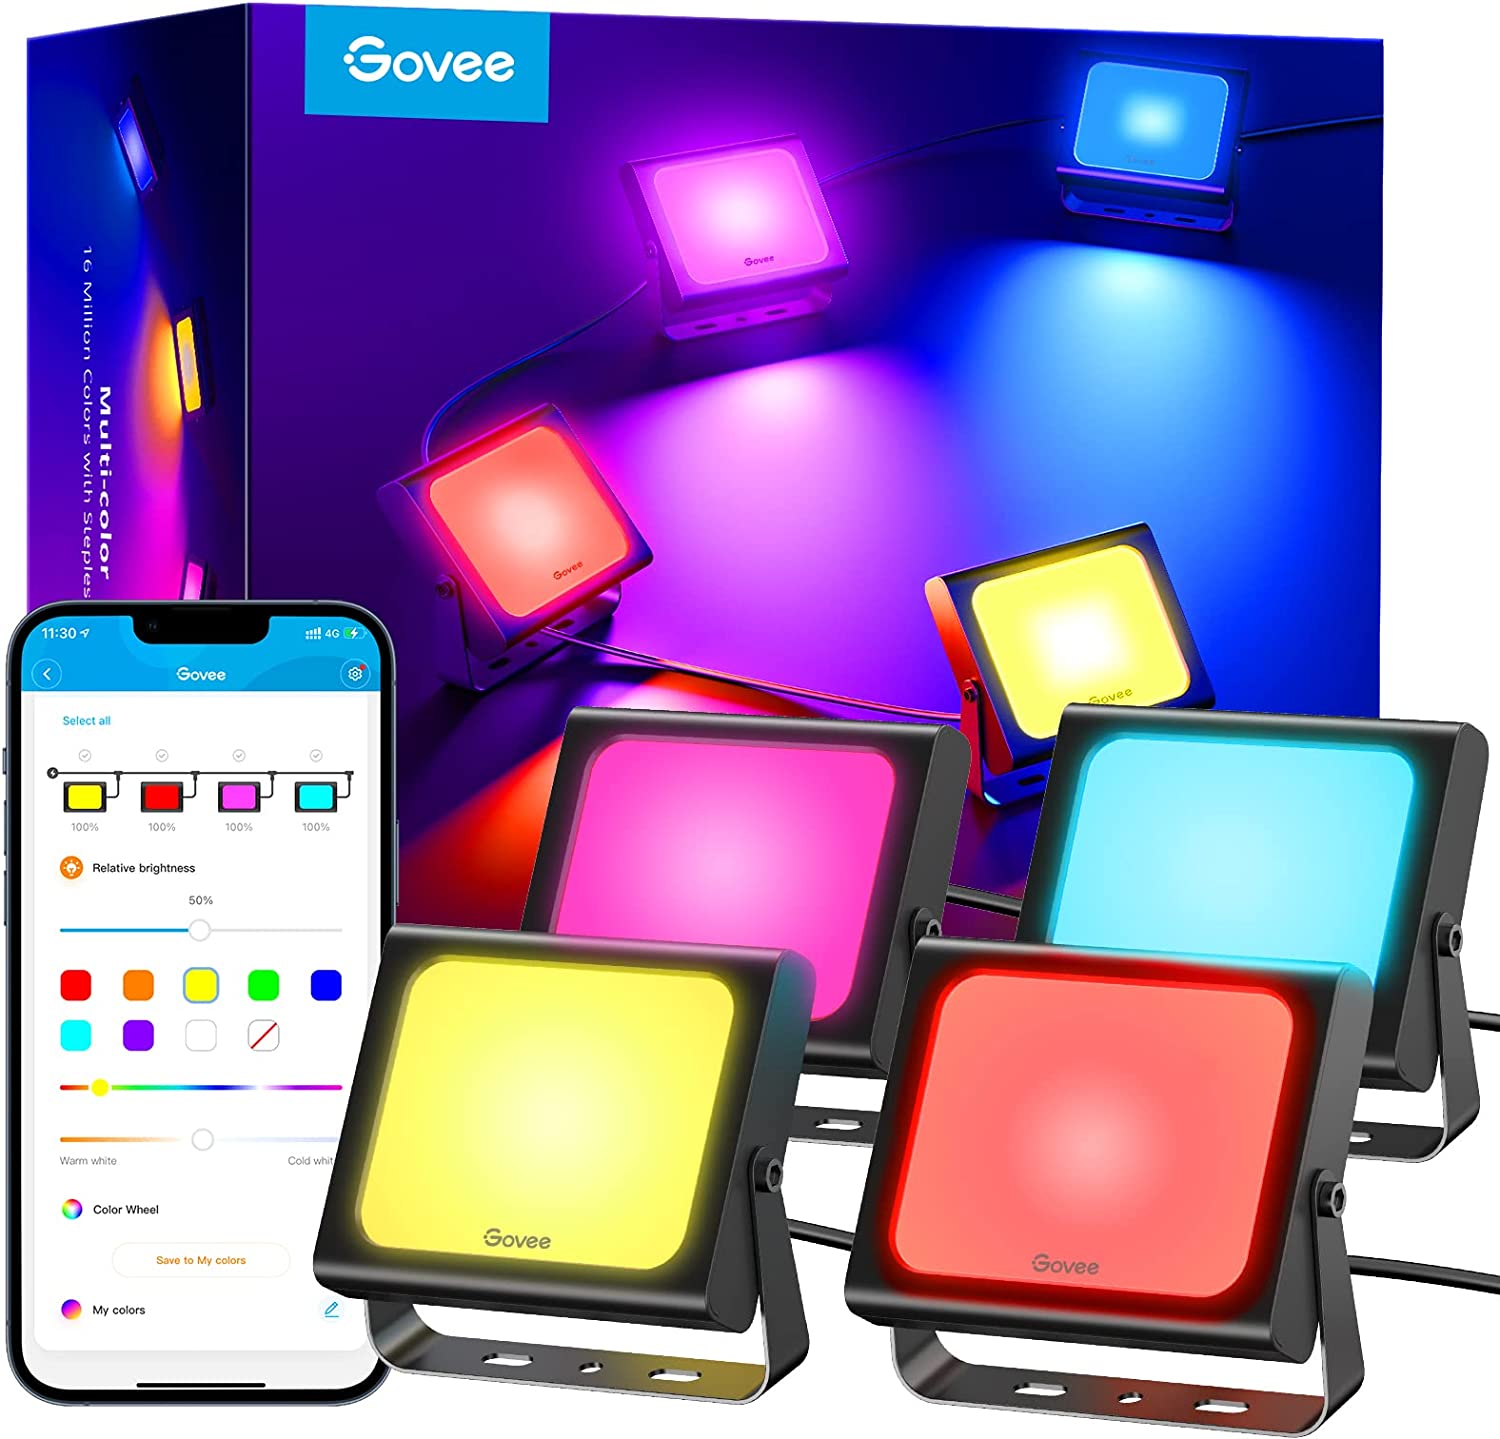 Govee Flood Lights Outdoor 4 Pack, 2200-6500K Dimmable RGBIC Warm White and  Daylight, Smart WiFi APP Control, Work with Alexa, IP66 for Garden Lawn